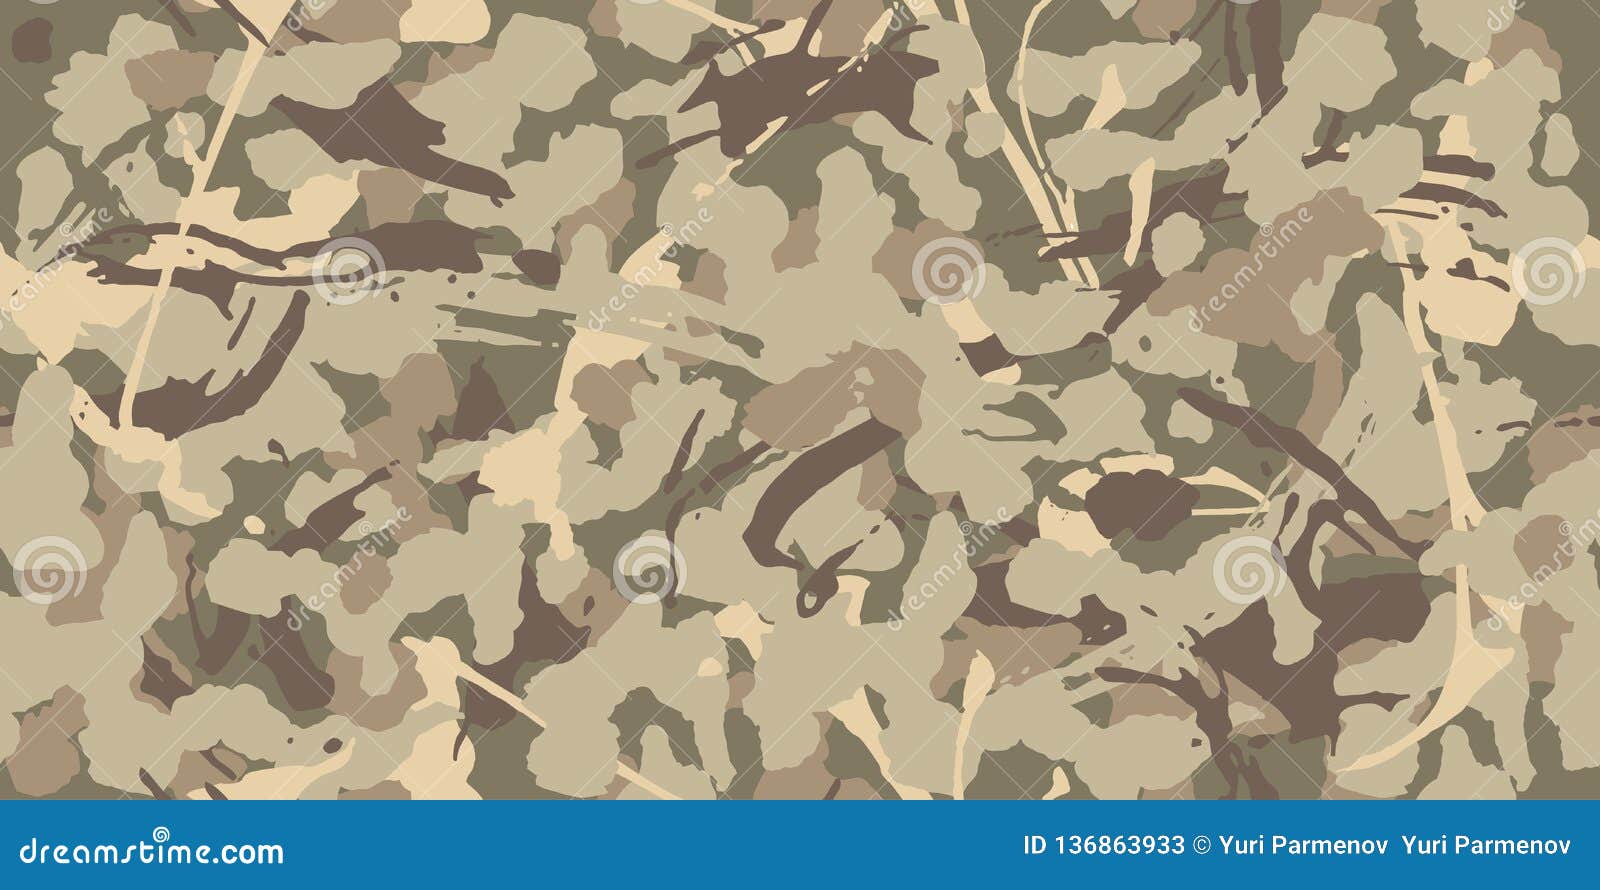 Digital Camo Background. Seamless Camouflage Pattern. Military Texture ...